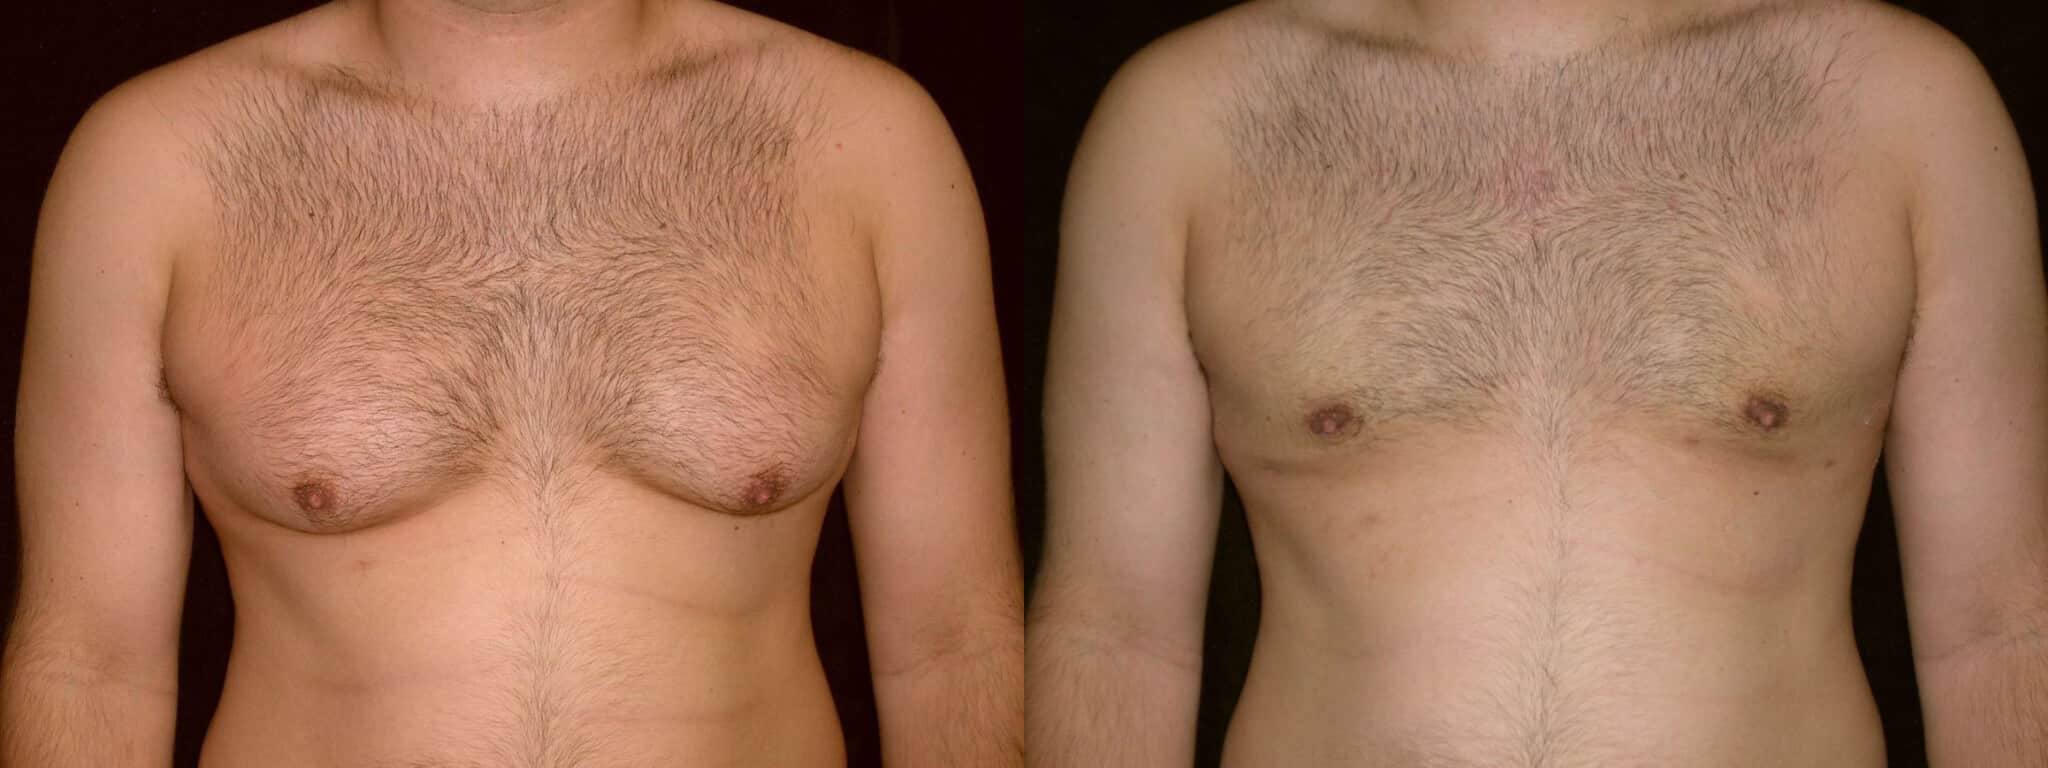 Gynecomastia Patient 8 Before & After